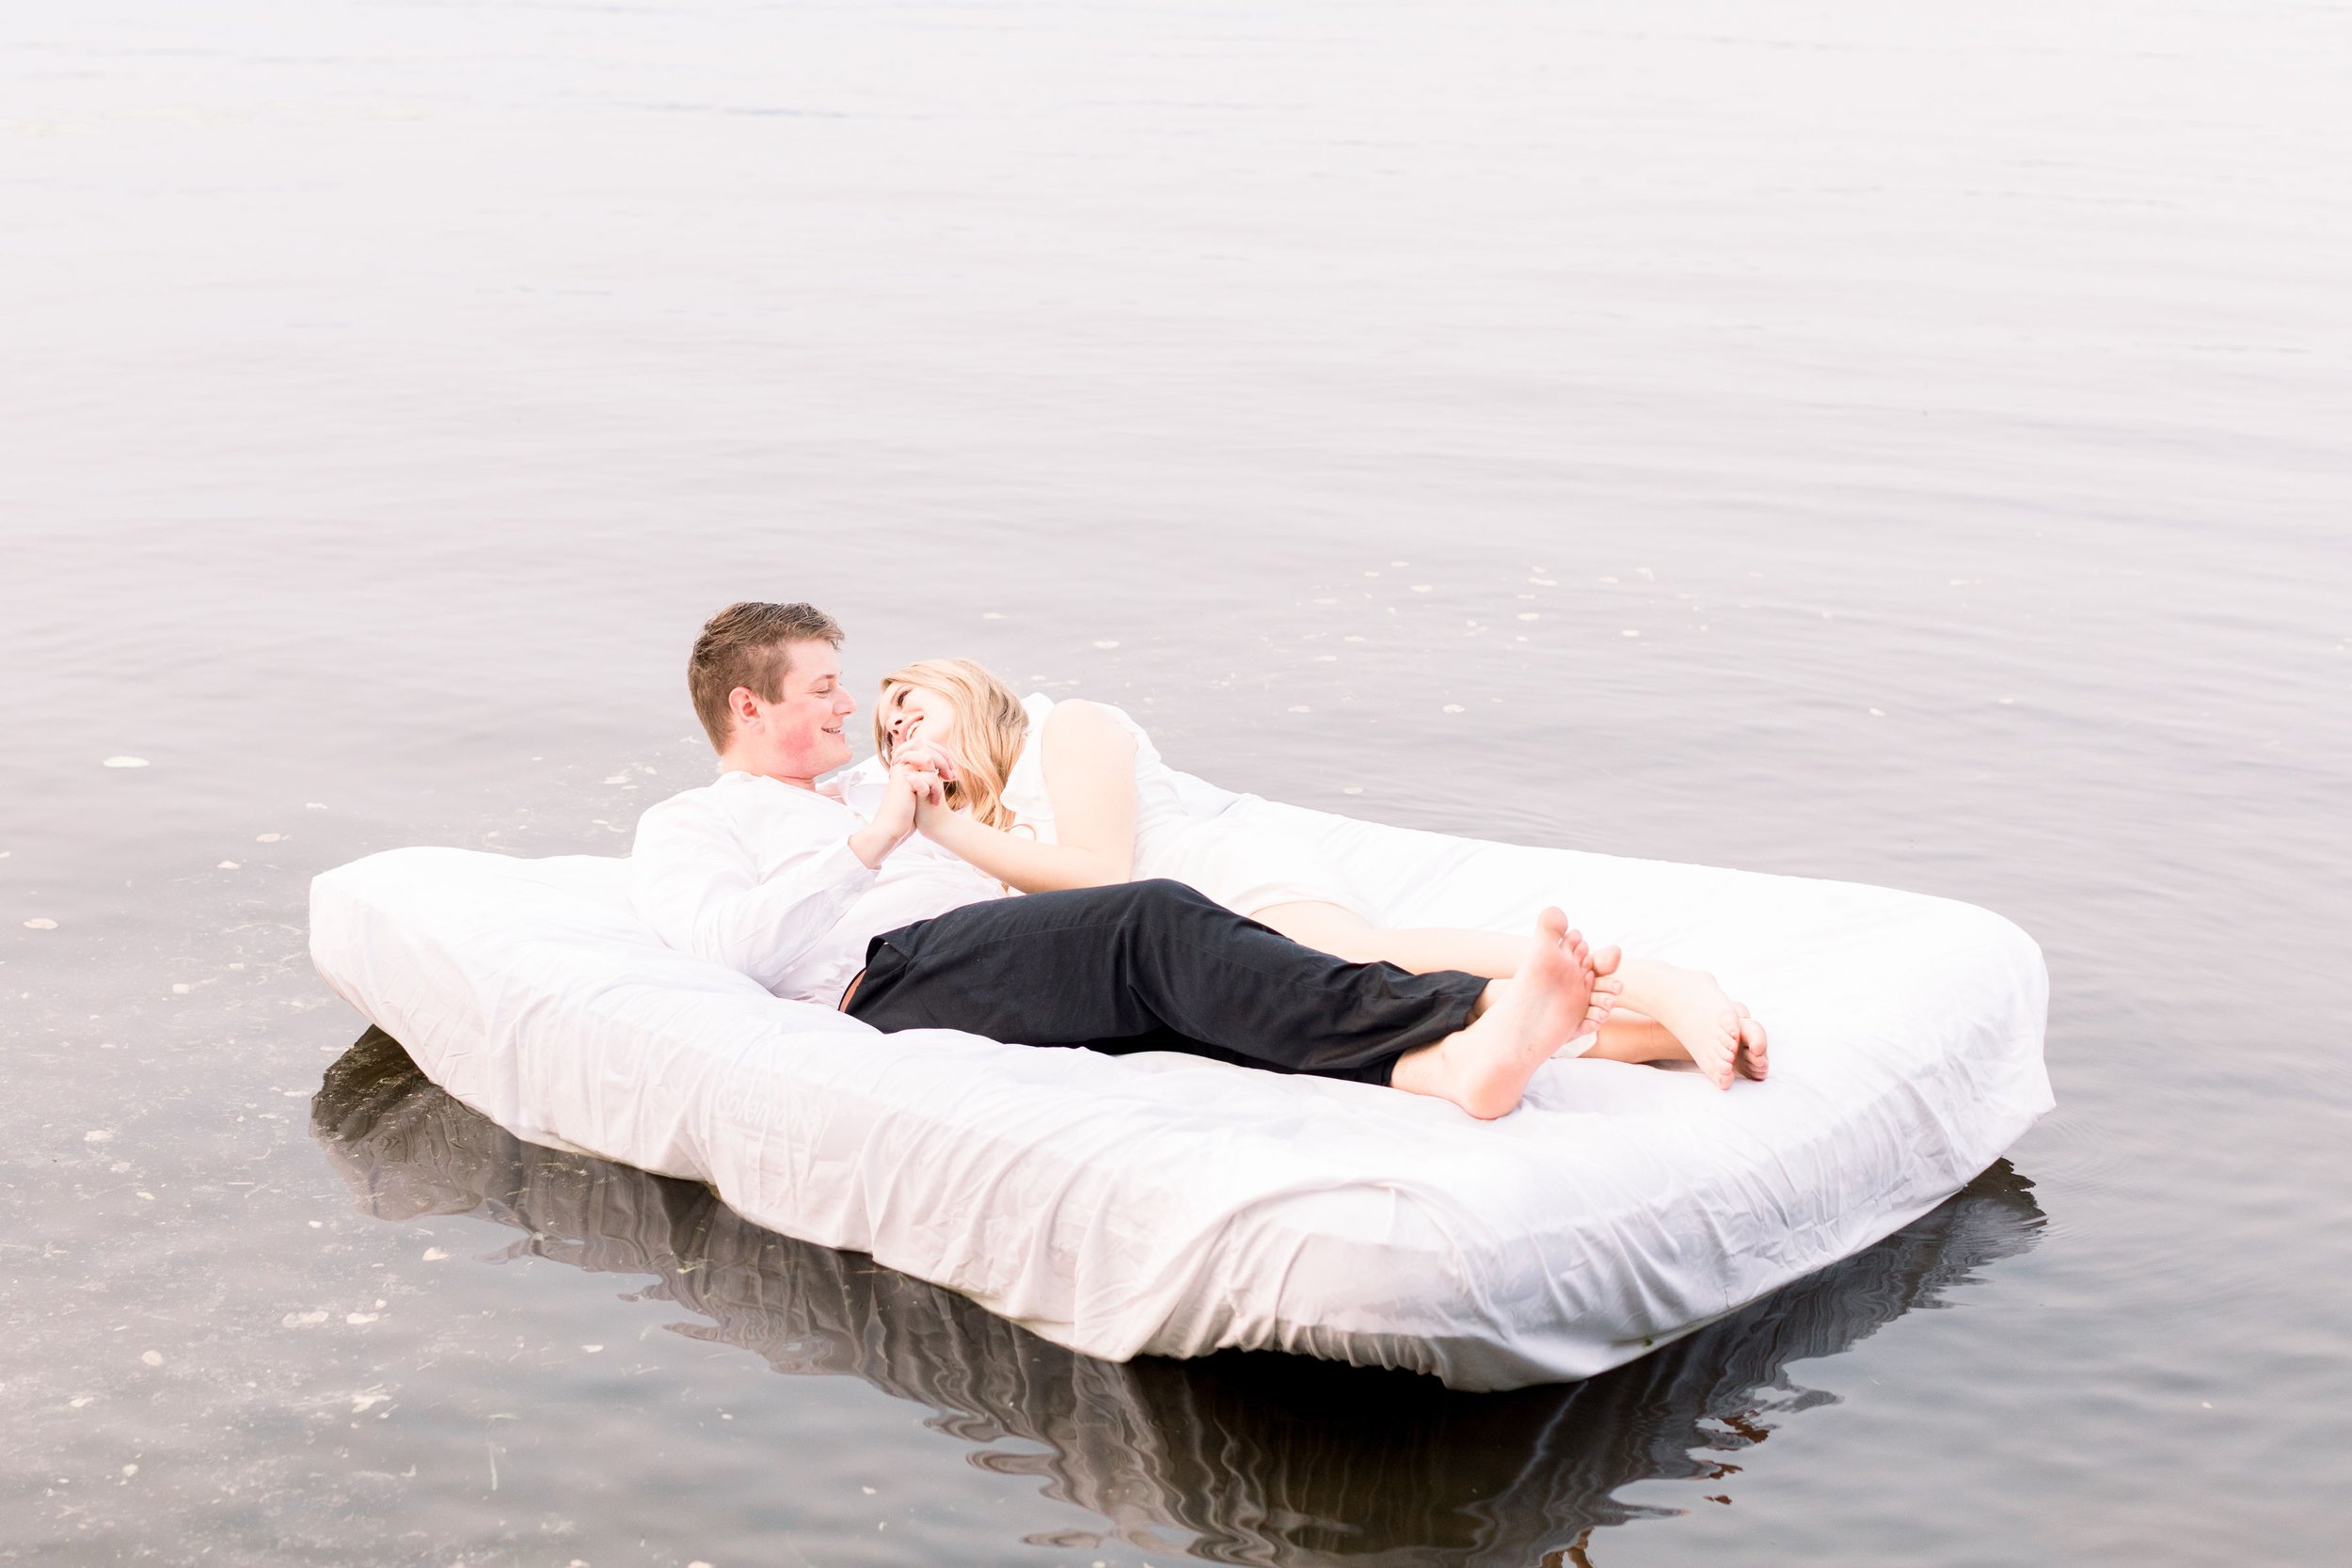  Chelsea Mason Photography captures boyfriend and girlfriend snuggling on an air mattress on a lake. fun lake engagement portraits #ChelseaMasonPhotography #ChelseaMasonEngagements #PinheysPointEngagements #OttawaEngagementPhotography 